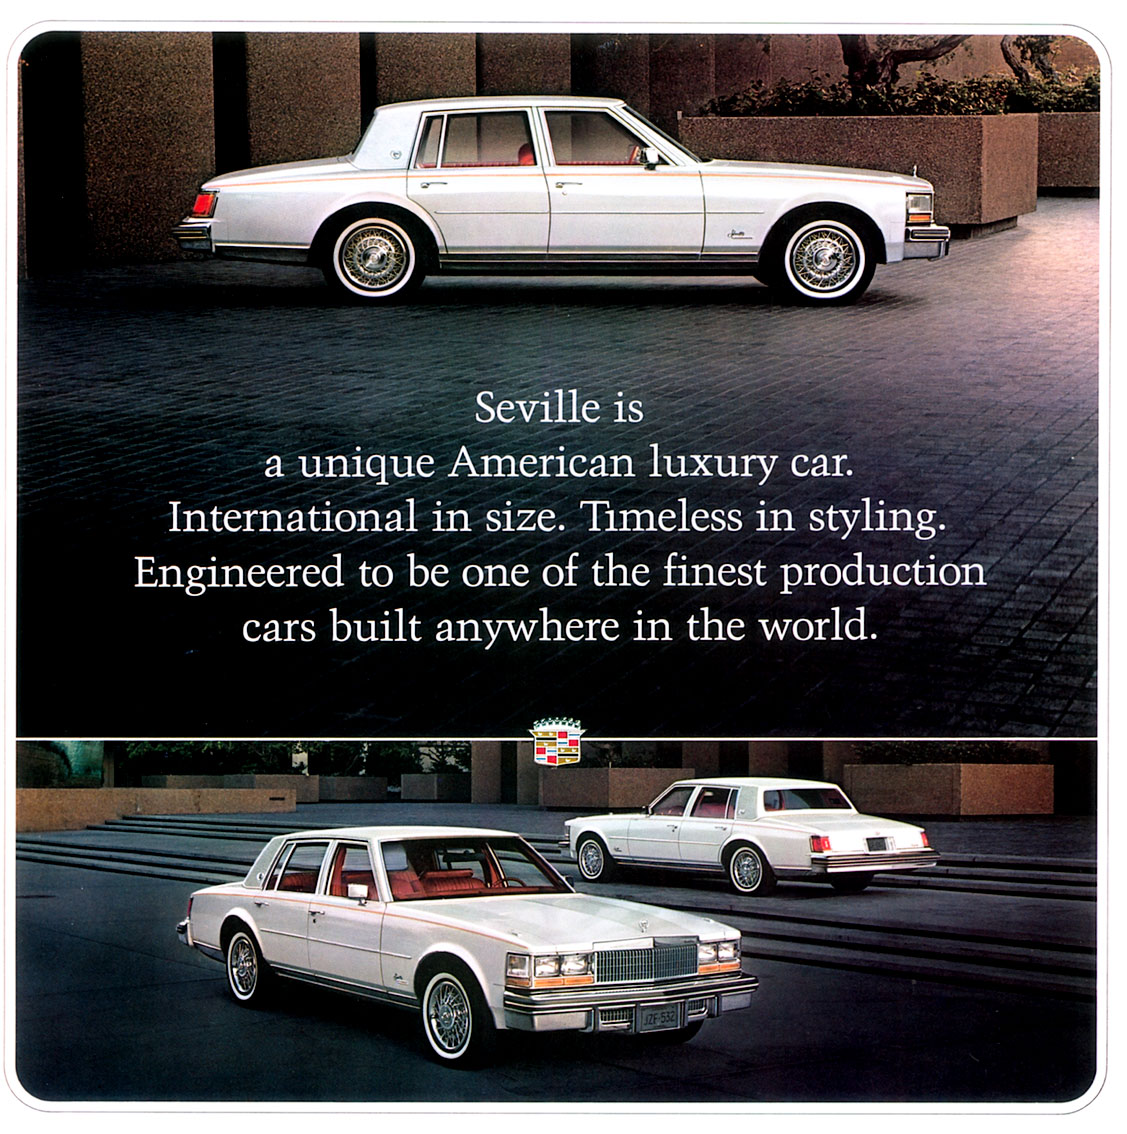 1977 Cadillac Seville Brochure Page 2